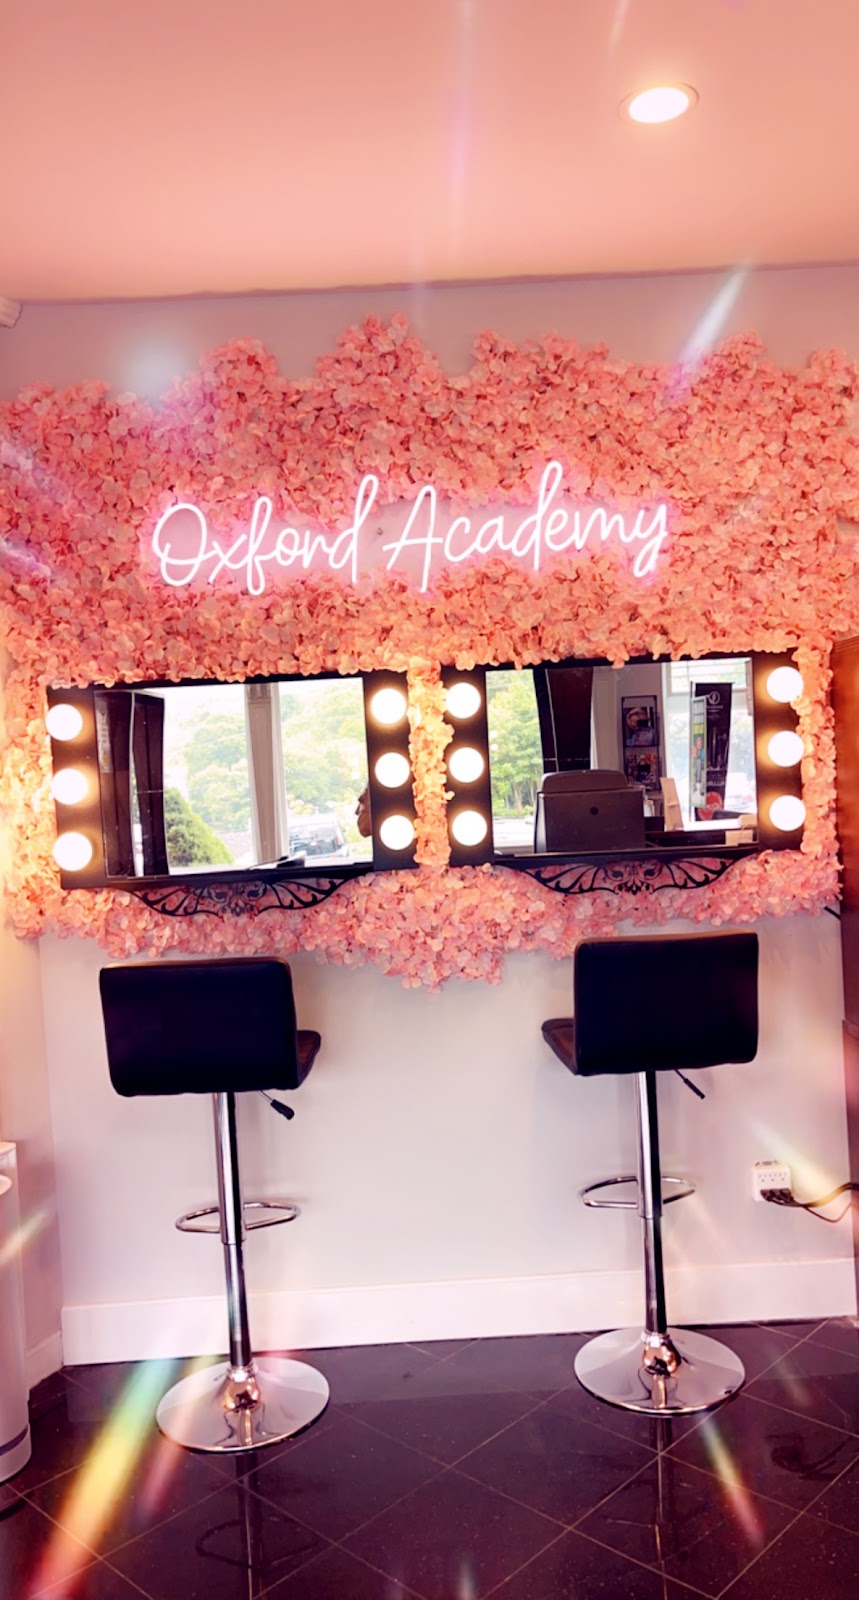 Oxford Academy of Hair Design | 153 North St, Seymour, CT 06483 | Phone: (203) 286-4533